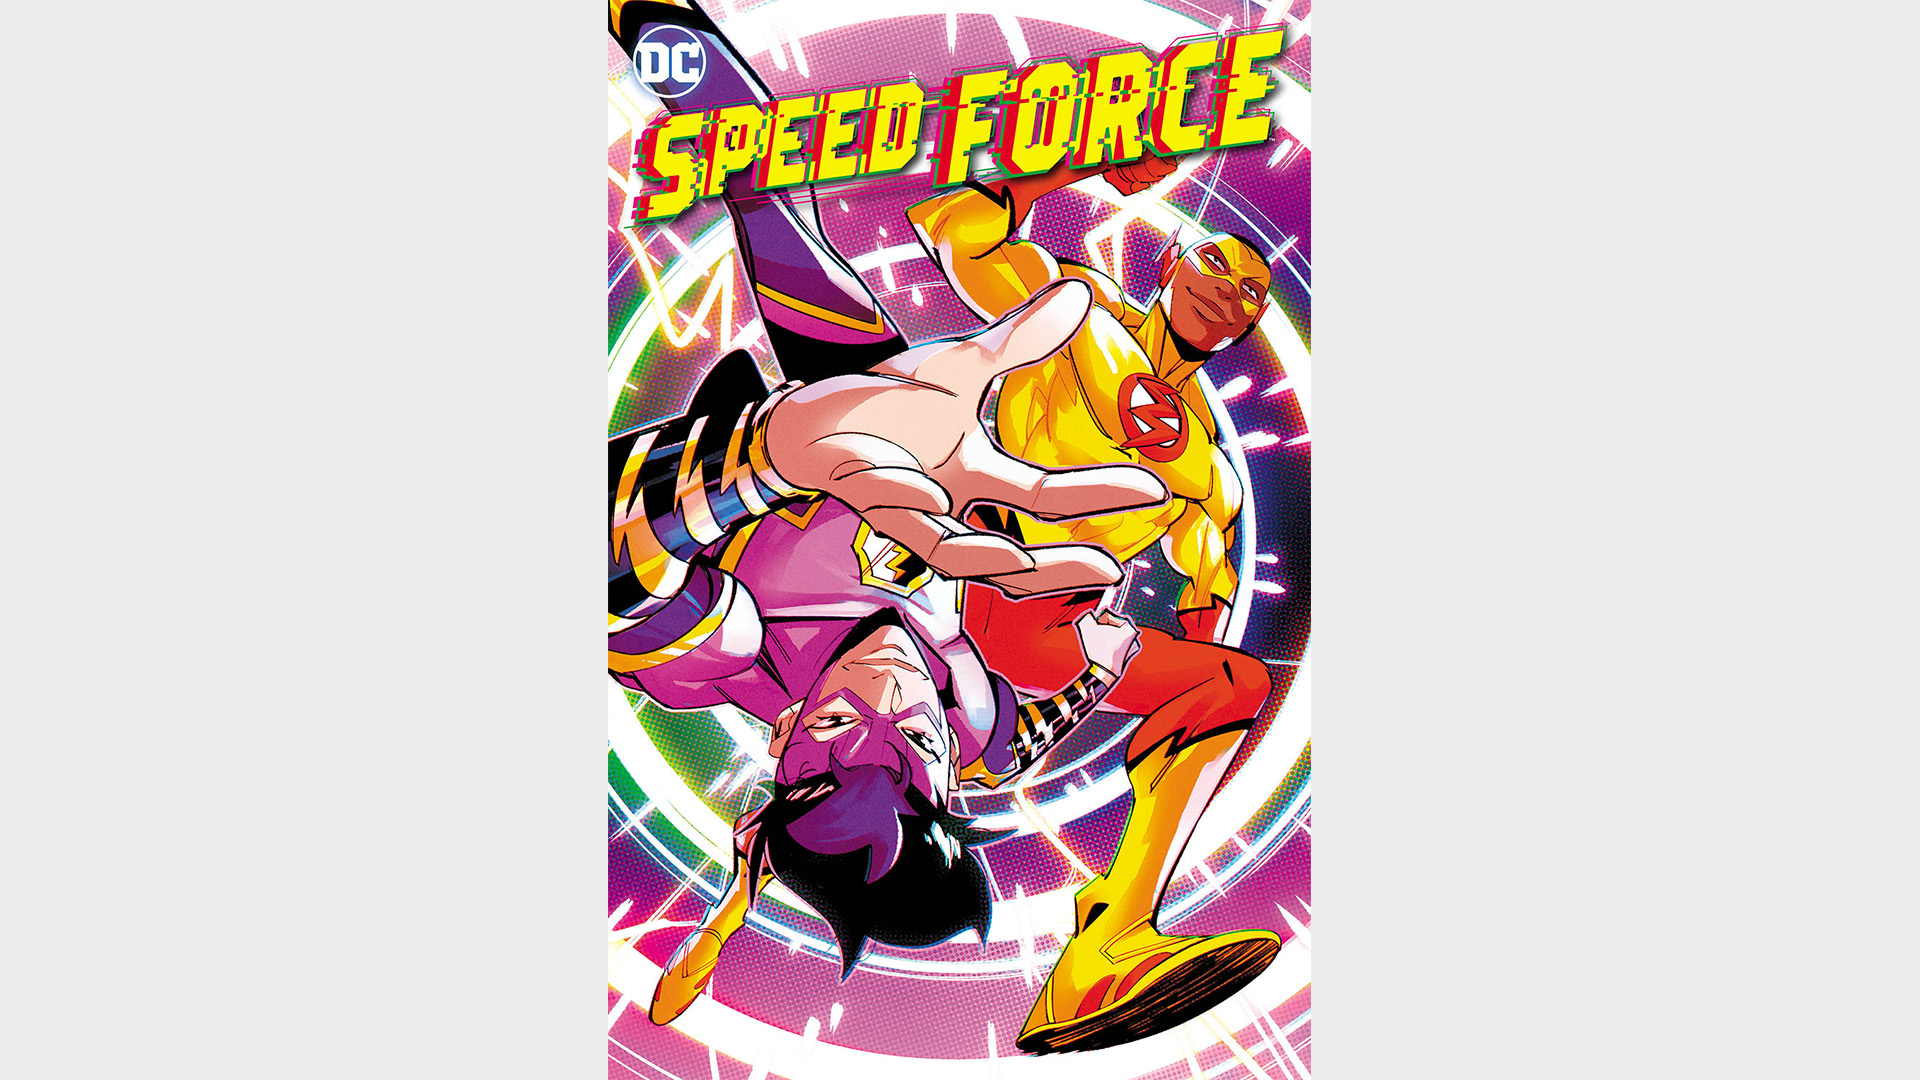 SPEED FORCE